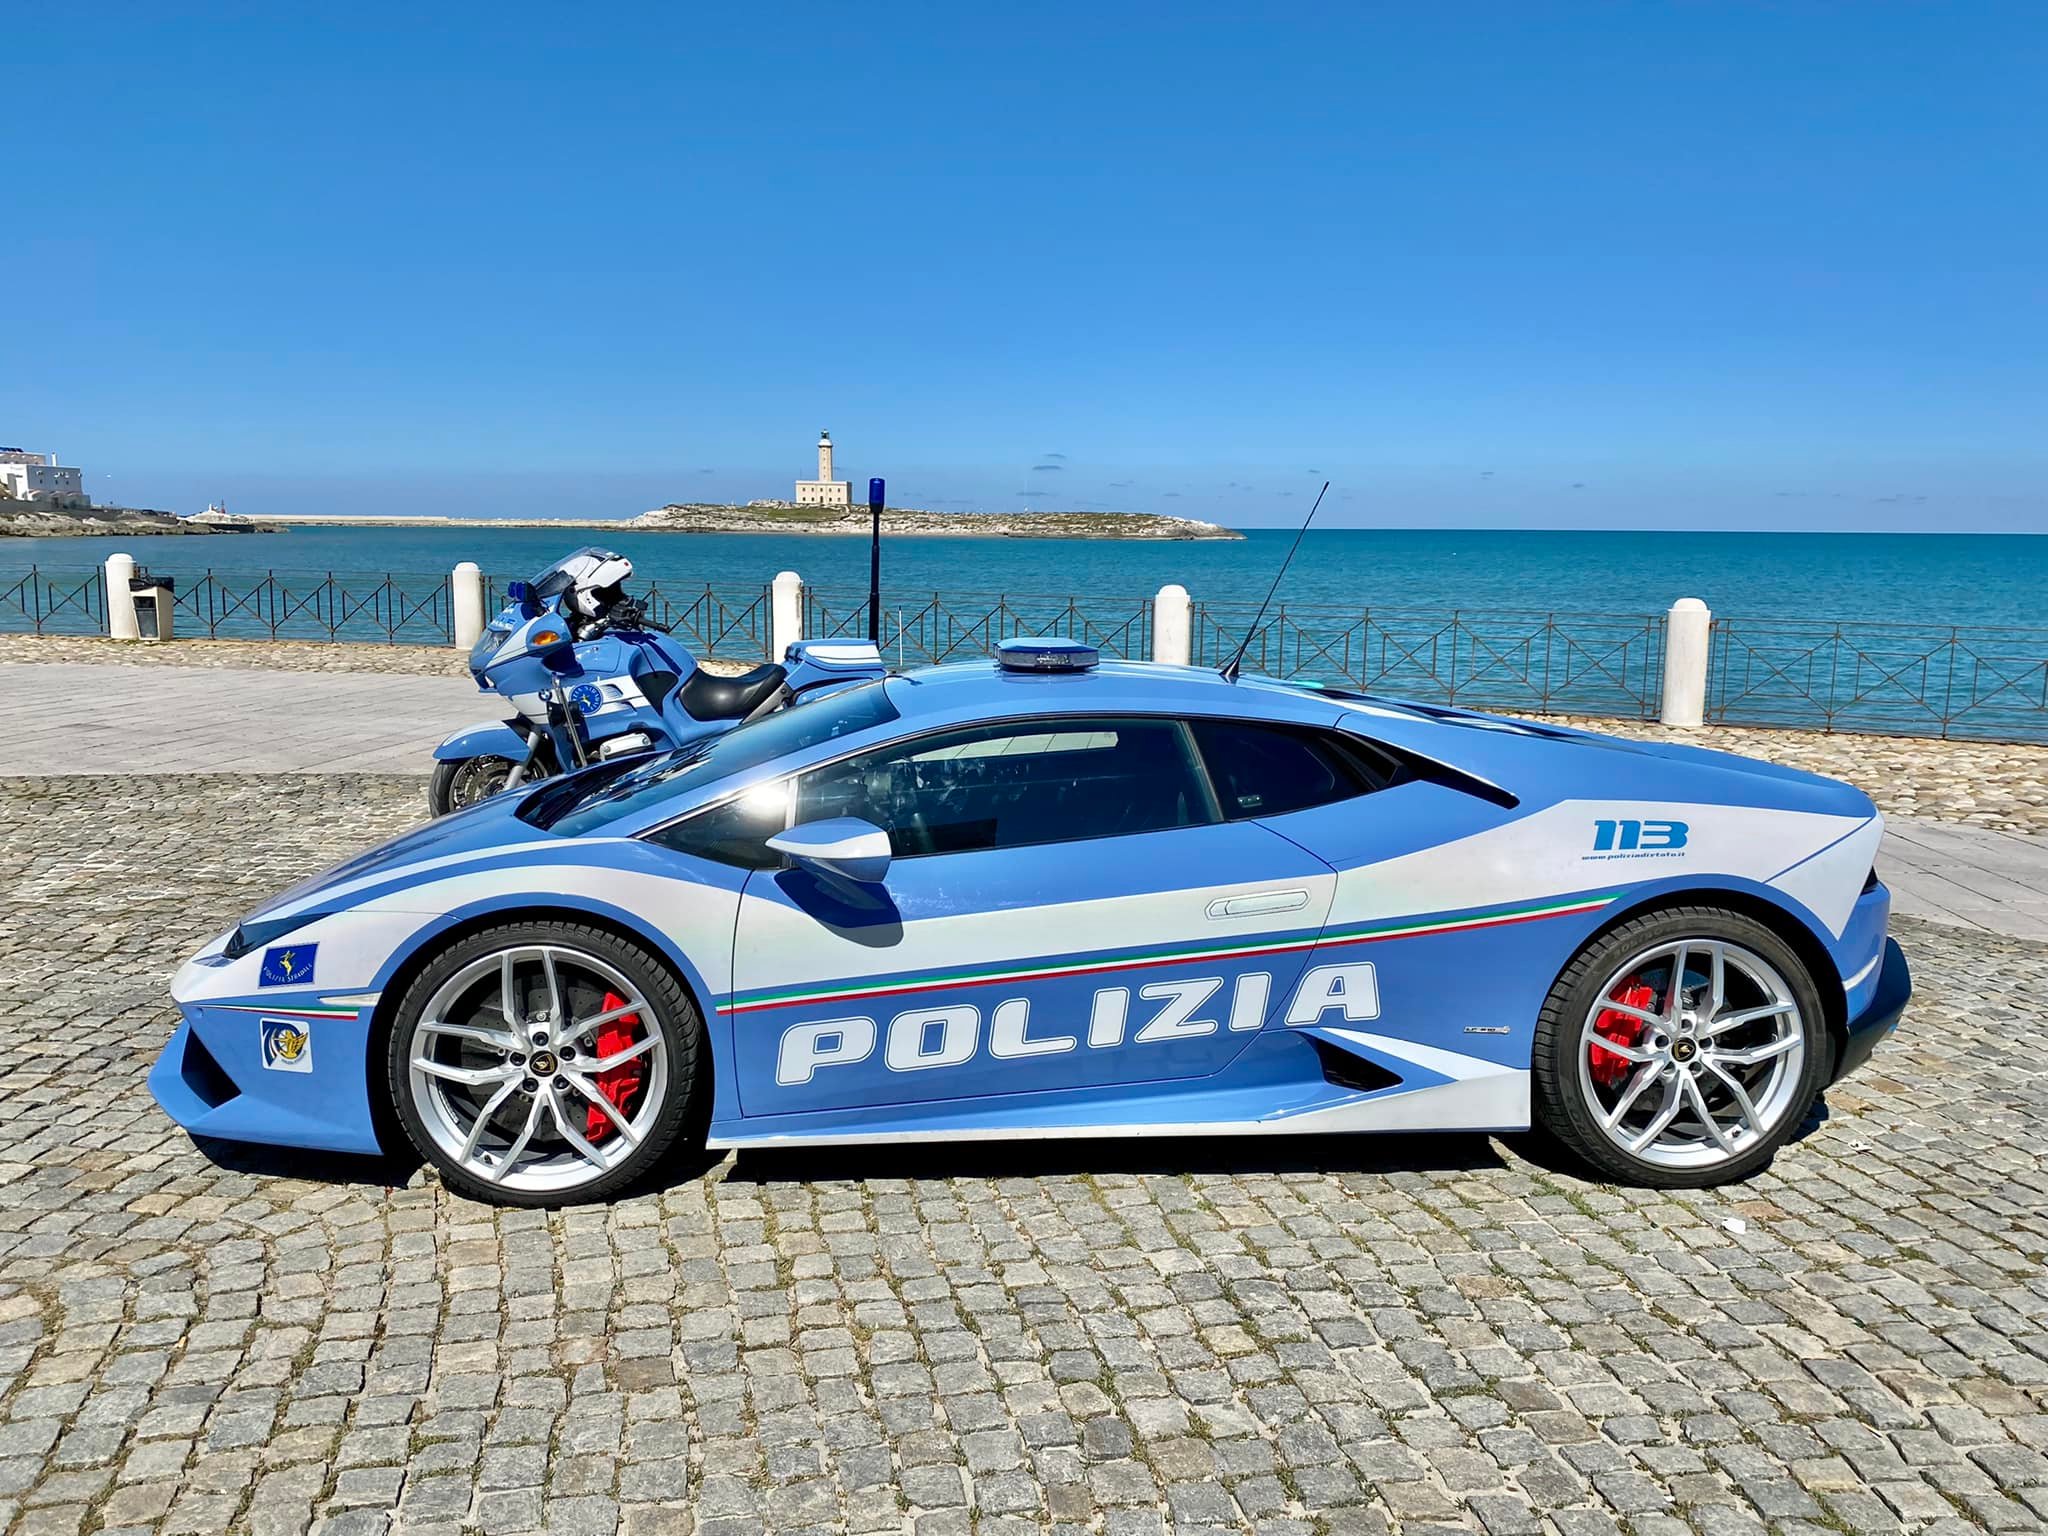 In Vieste there is the Lamborghini of the Police